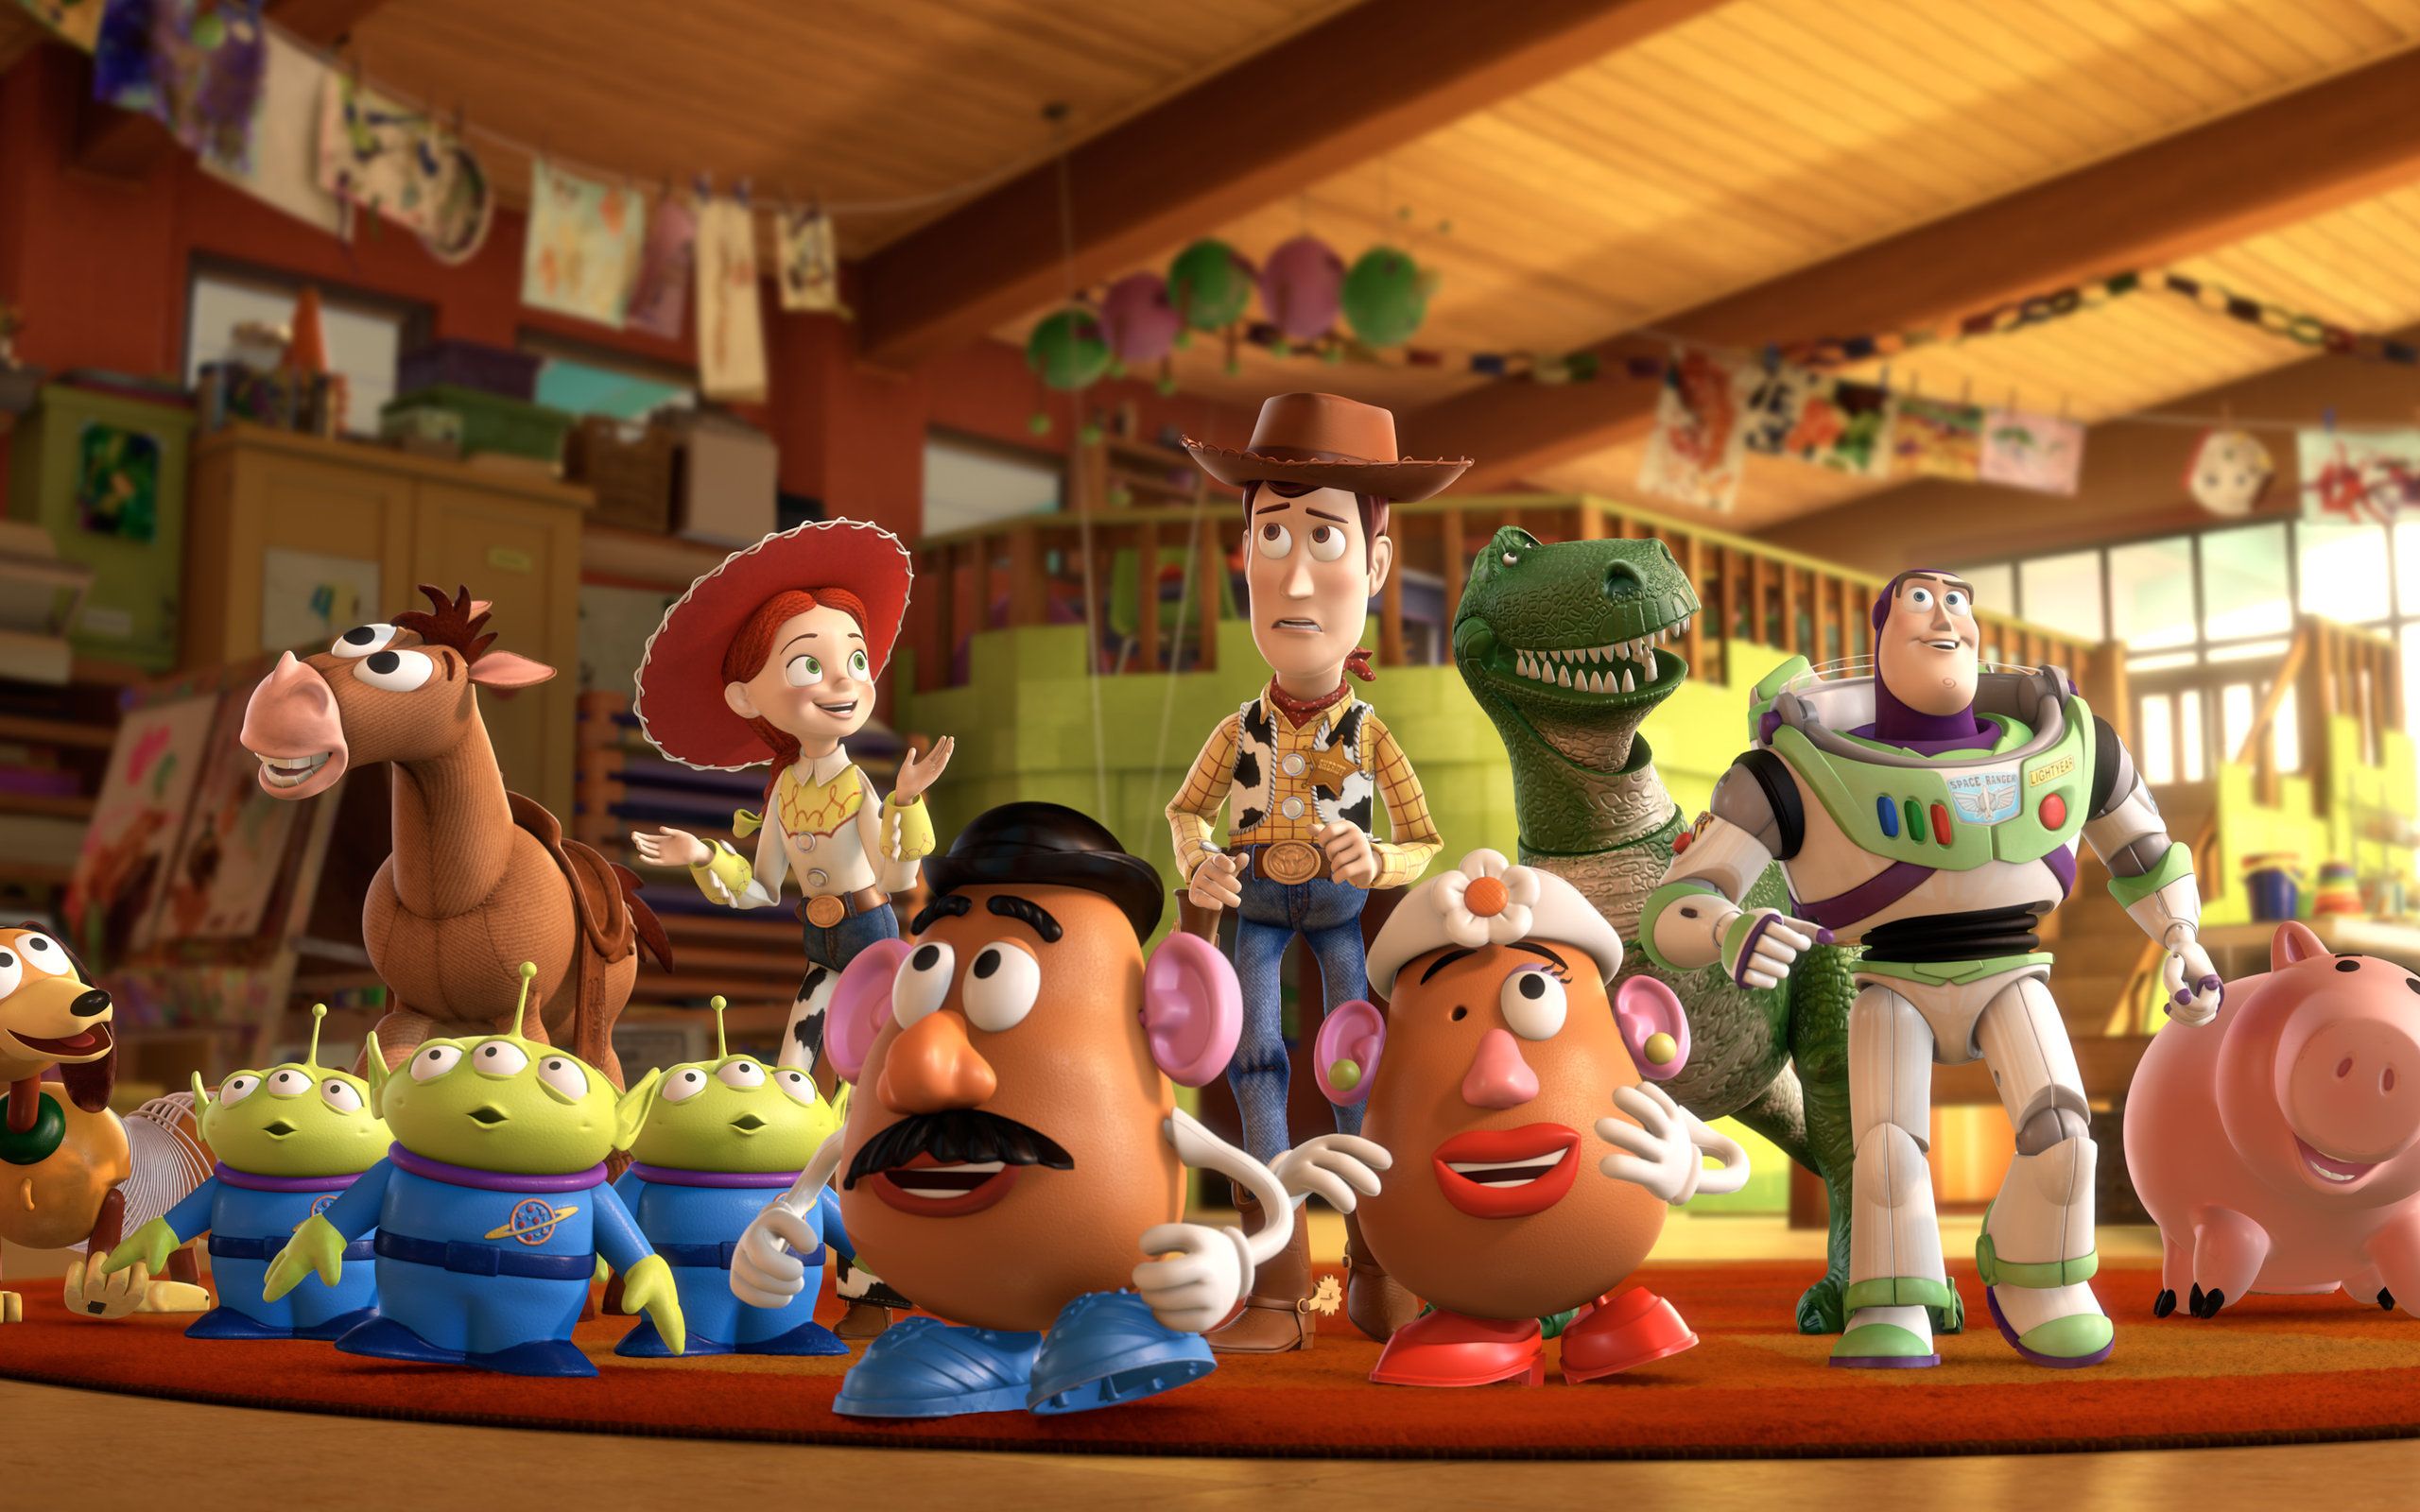 Toy Story Computer Wallpapers, Desktop Backgrounds 2560x1600